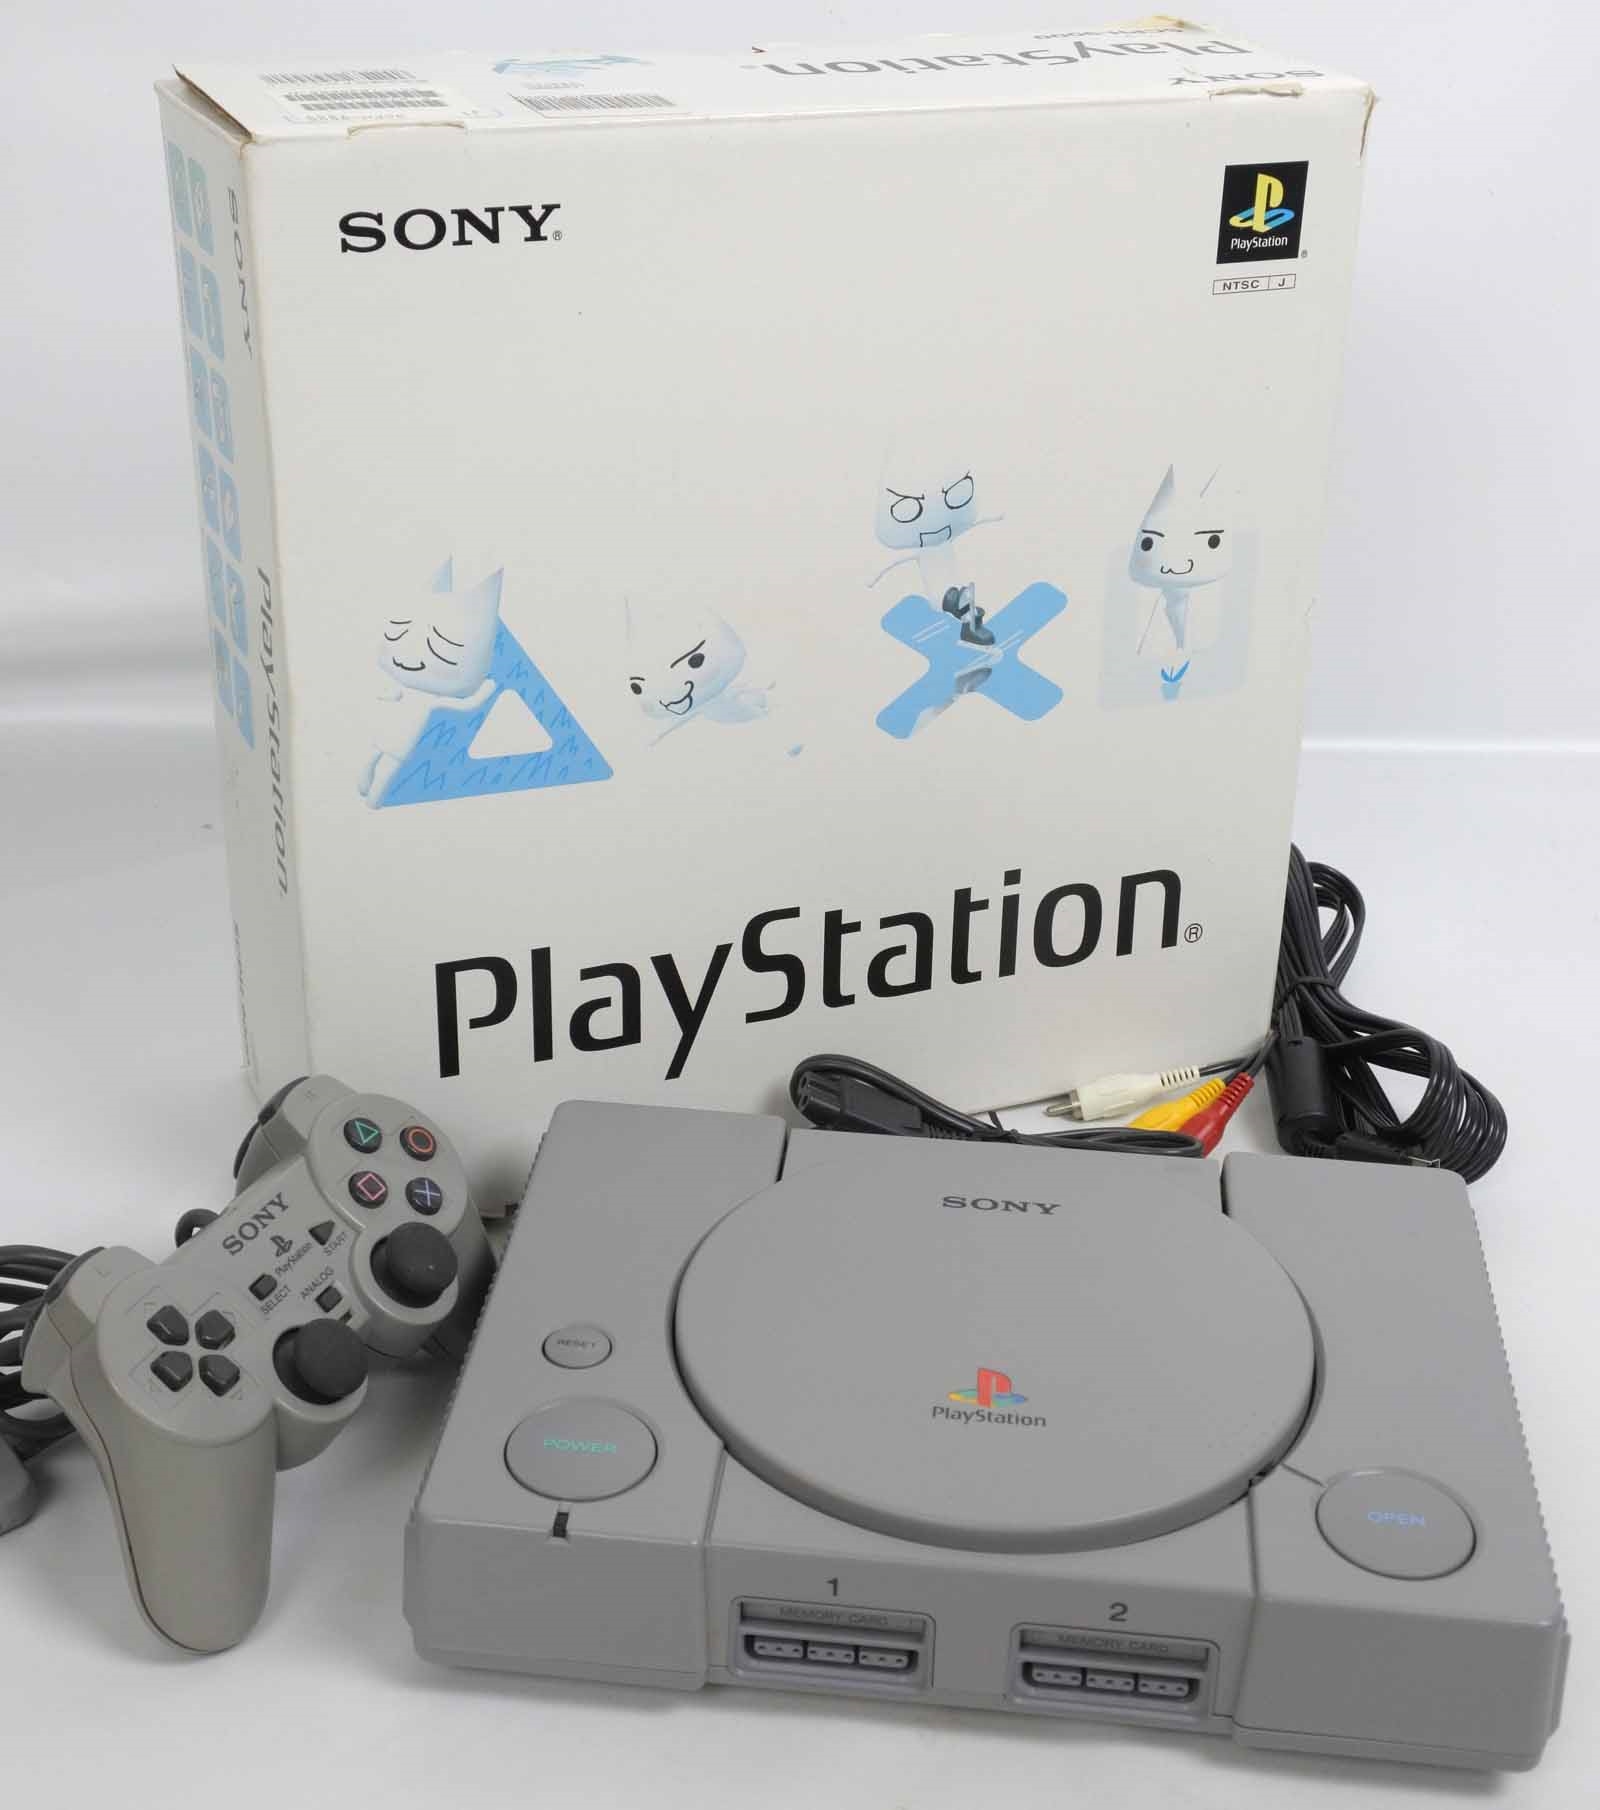 SONY Playstation Console System TORO Boxed SCPH-9000 Tested A1635688 ...